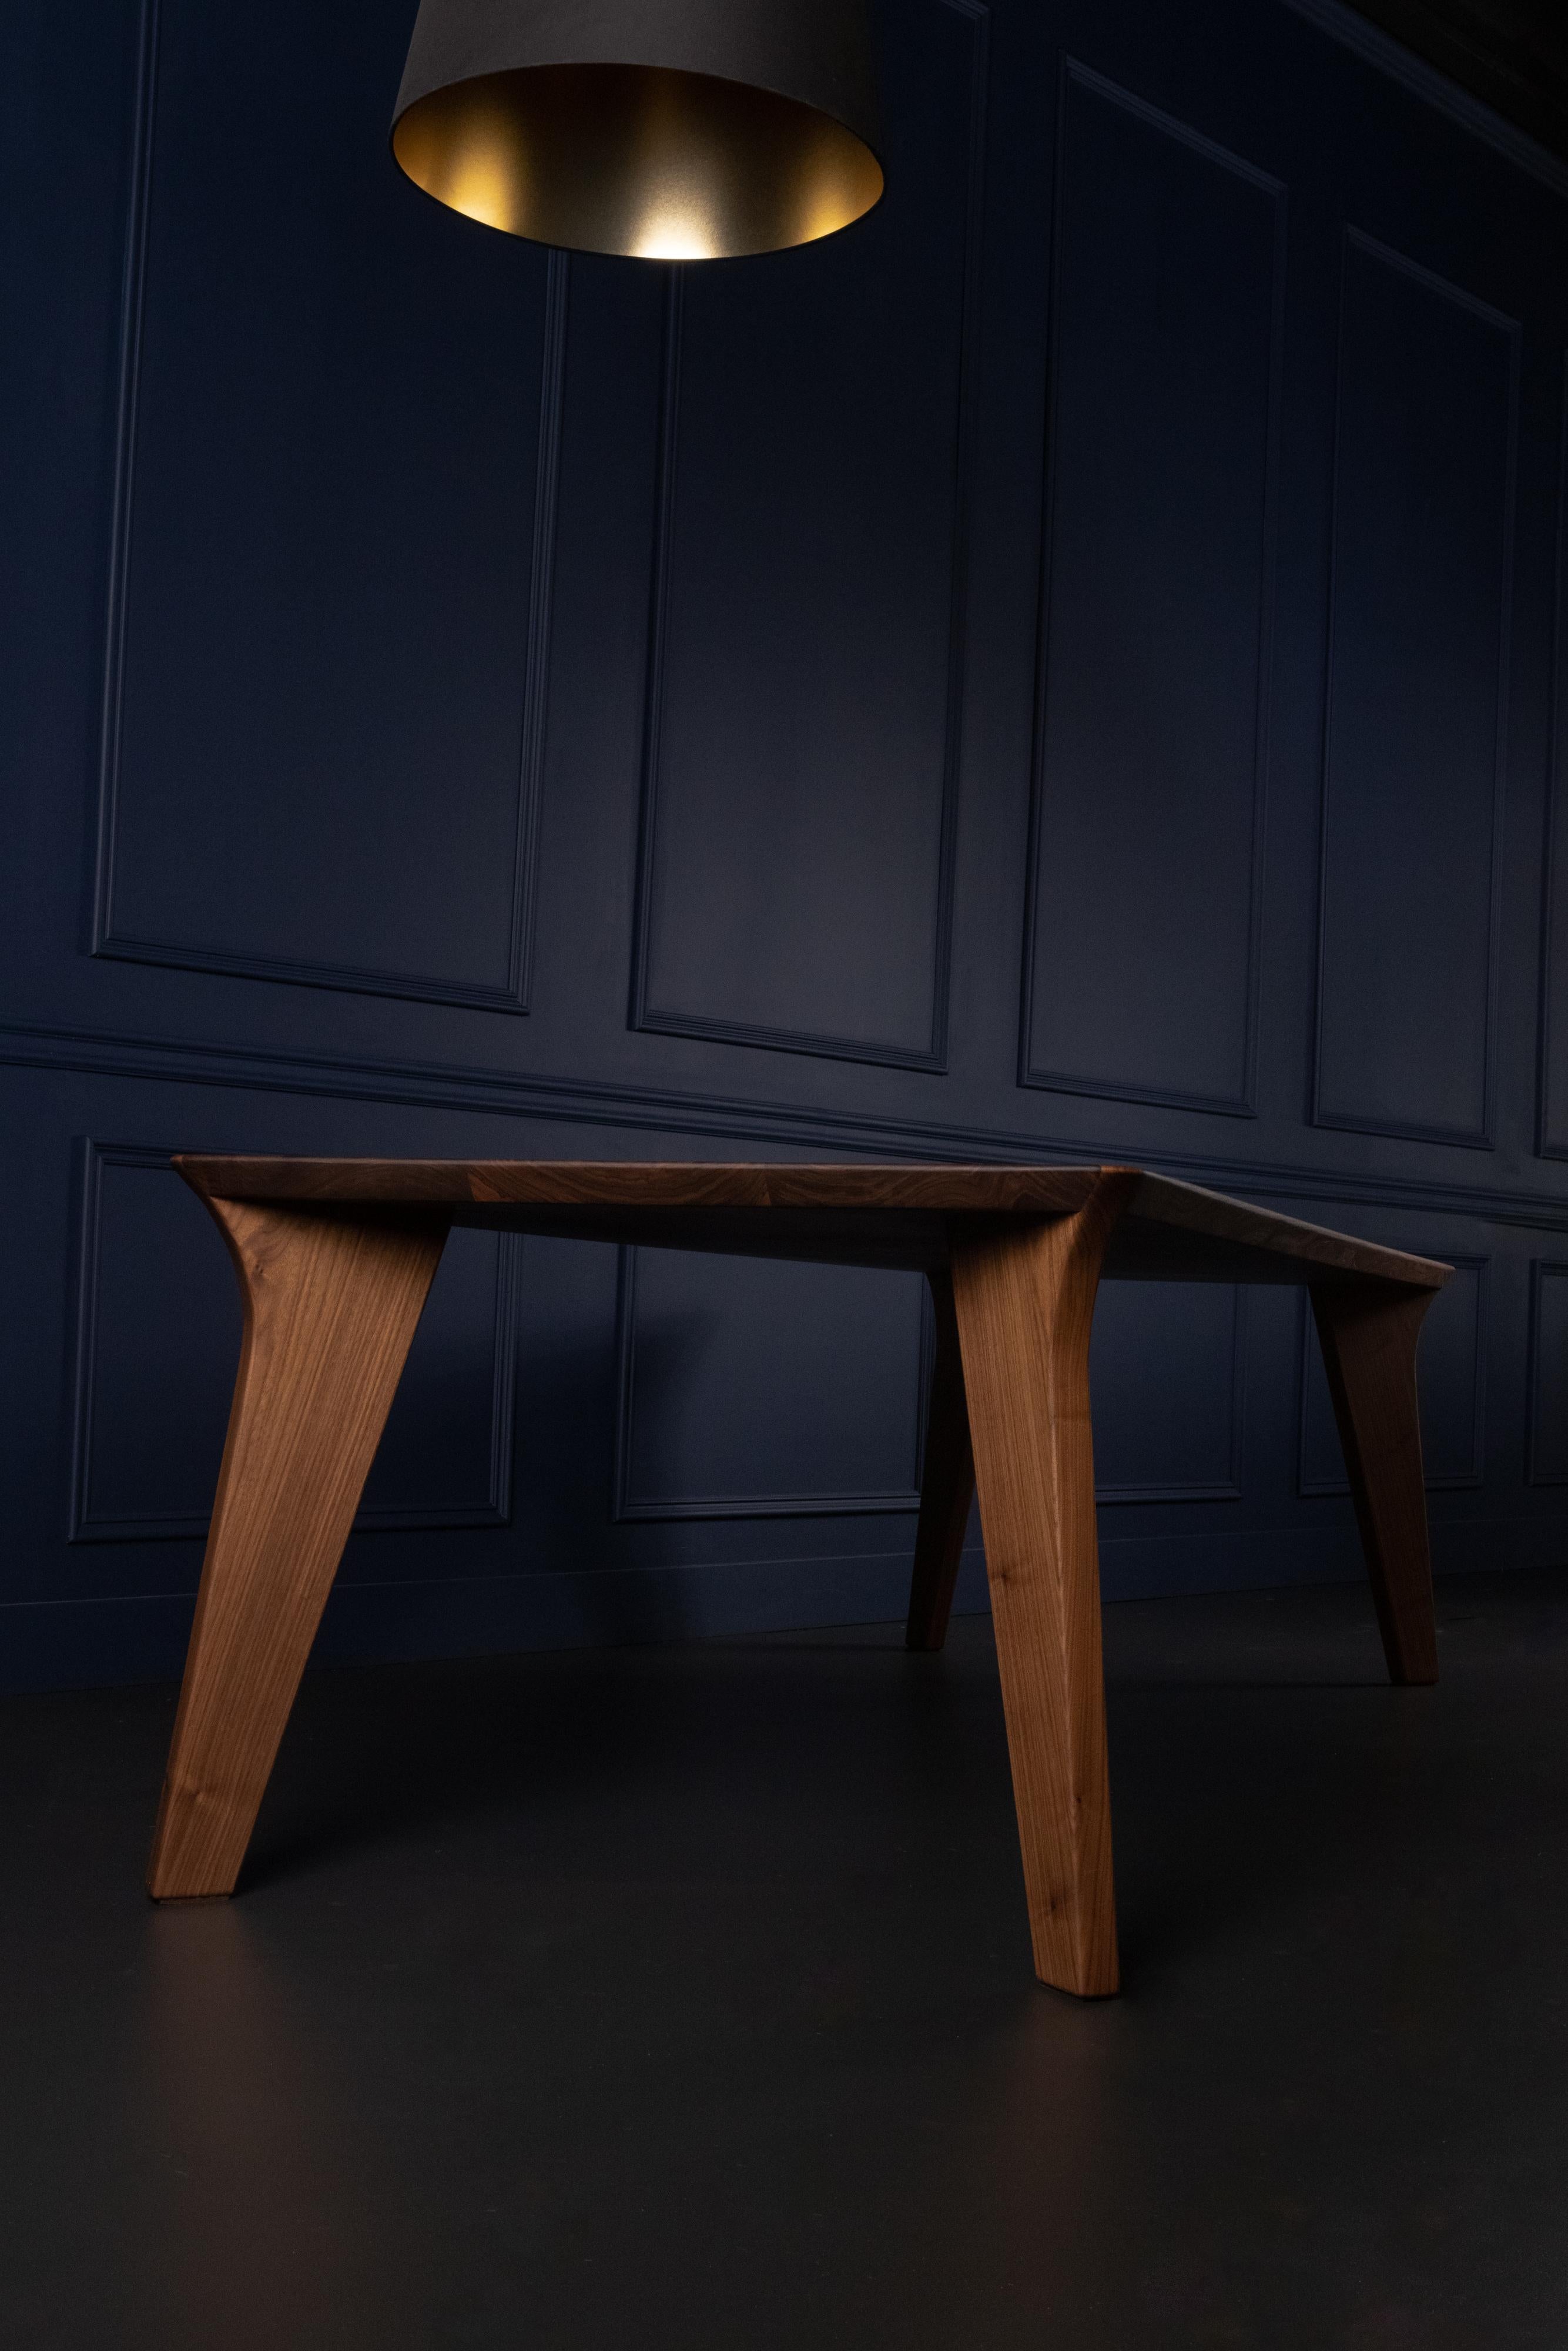 Canadian Vöeg Dining Table, Solid Black Walnut with Exposed Joinery